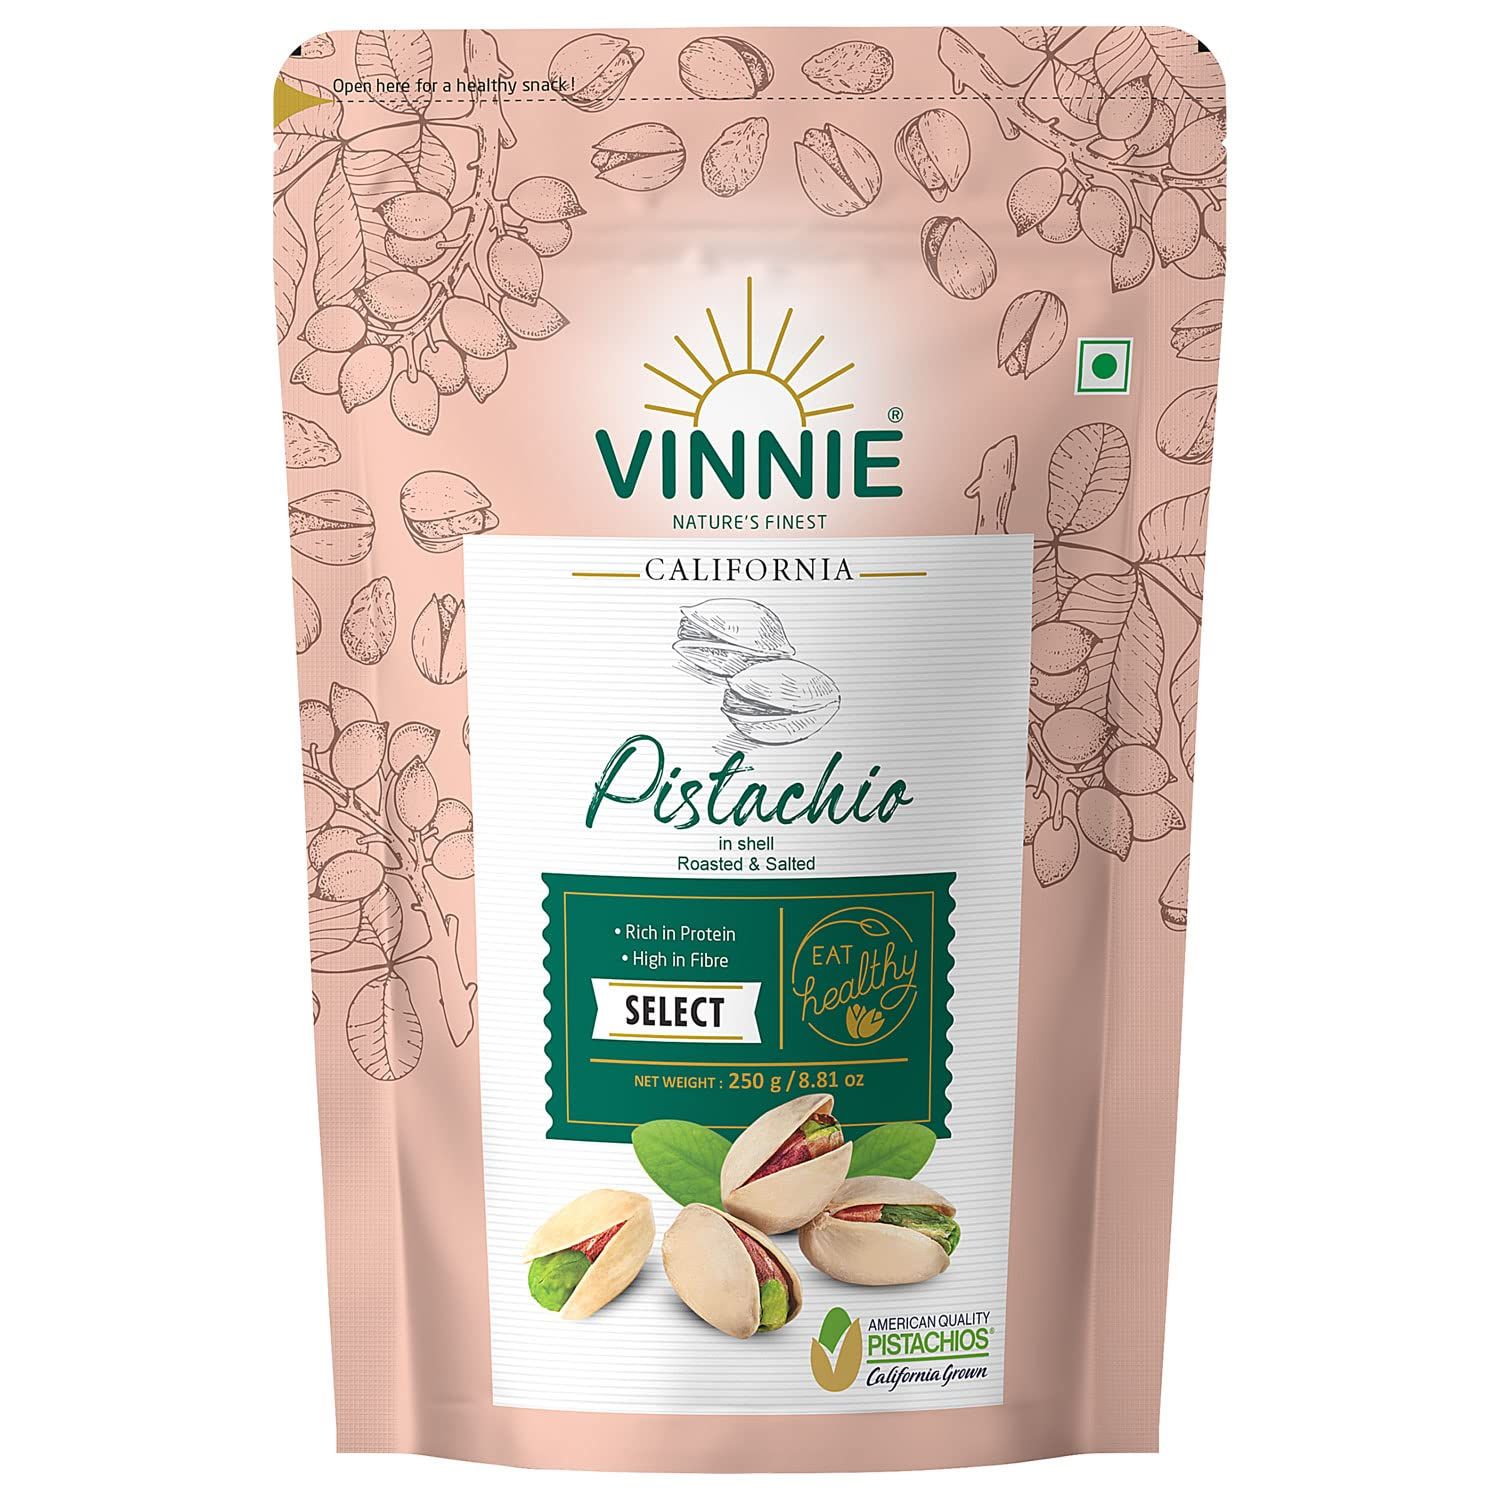 Vinnie American Inshell Pistachios Roasted and Salted Pista with Shell Image